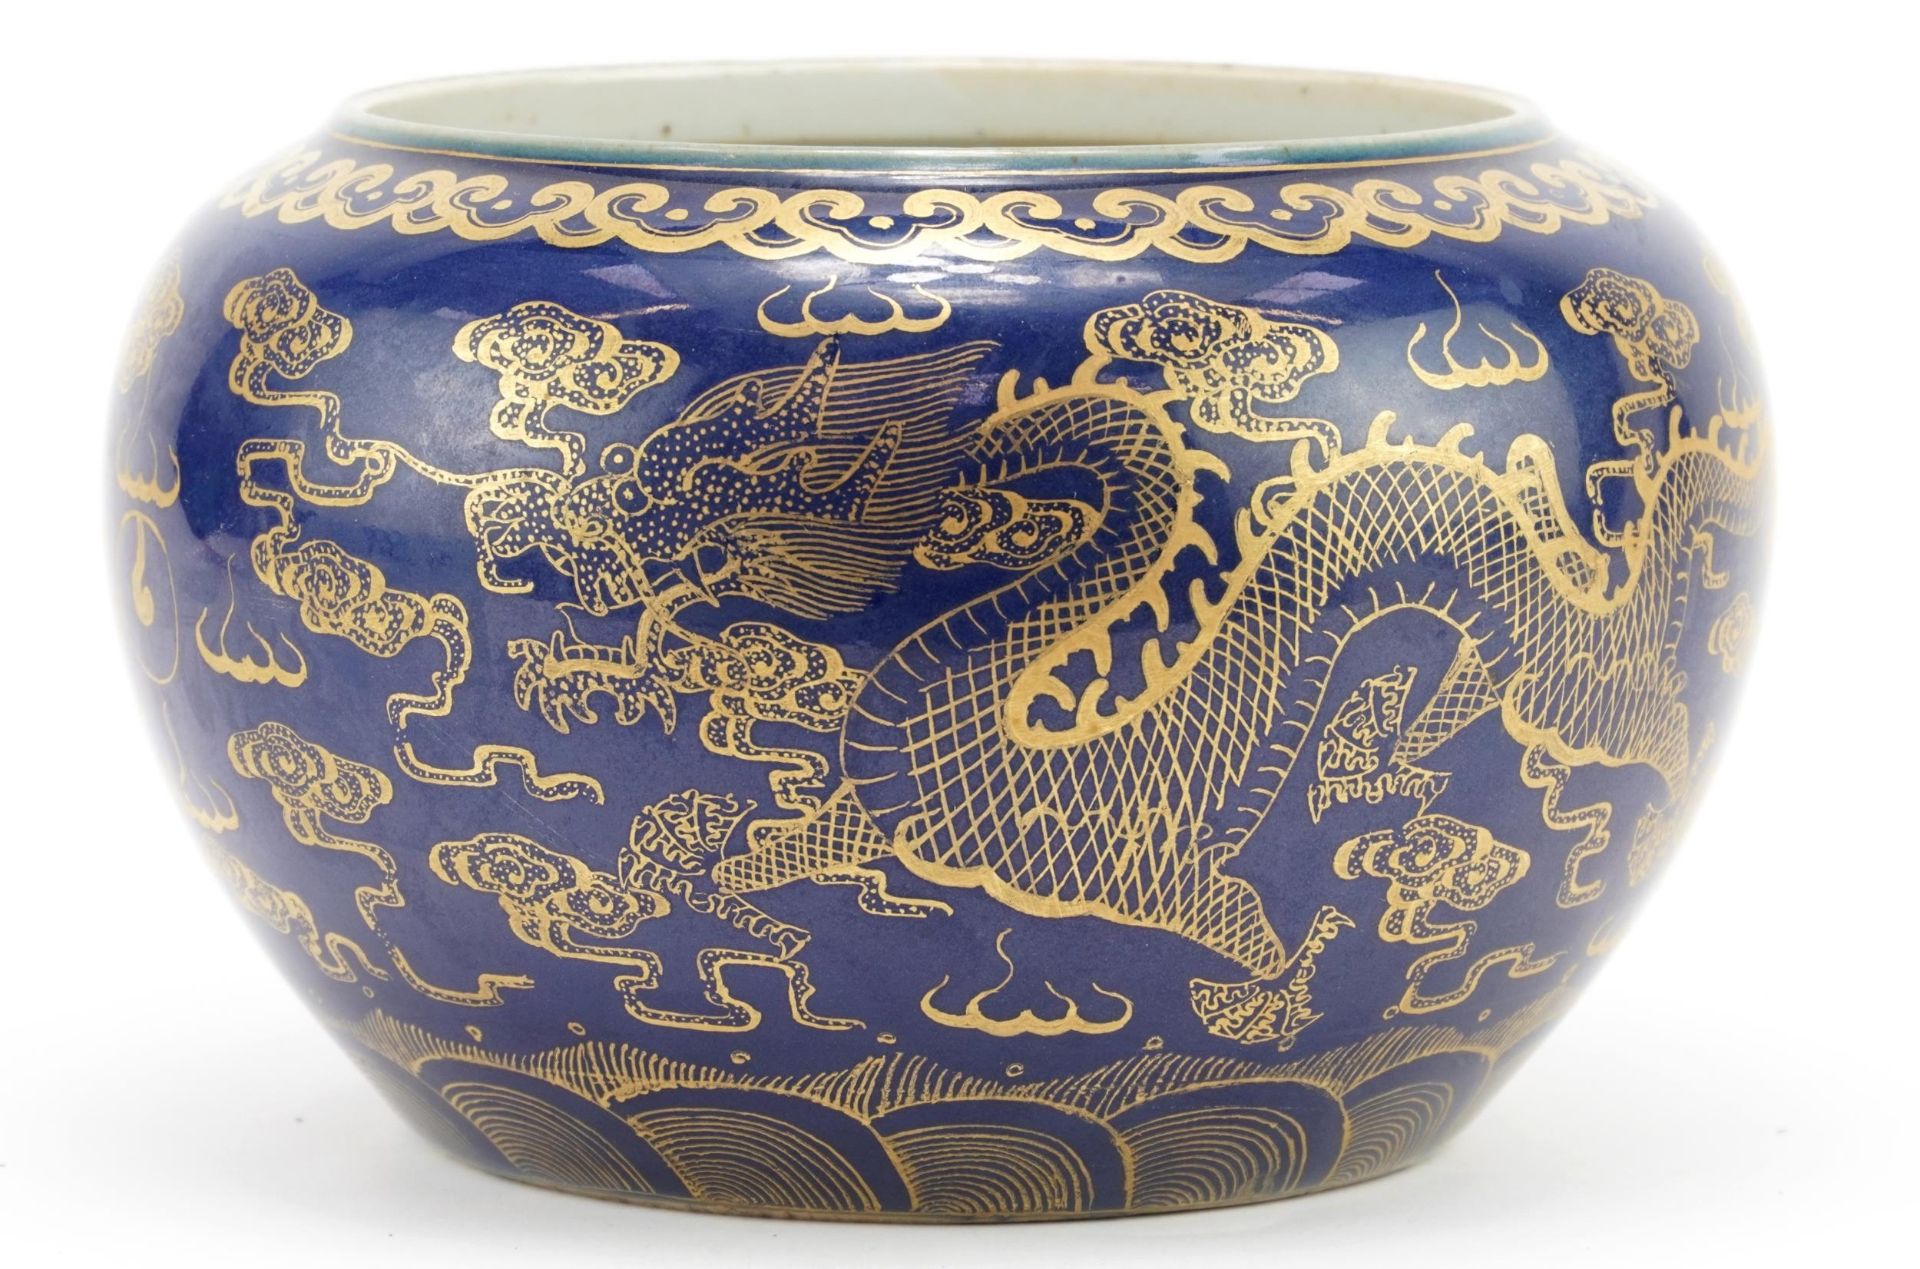 Chinese porcelain powder blue ground jardiniere gilded with dragons chasing the flaming pearl - Image 2 of 6